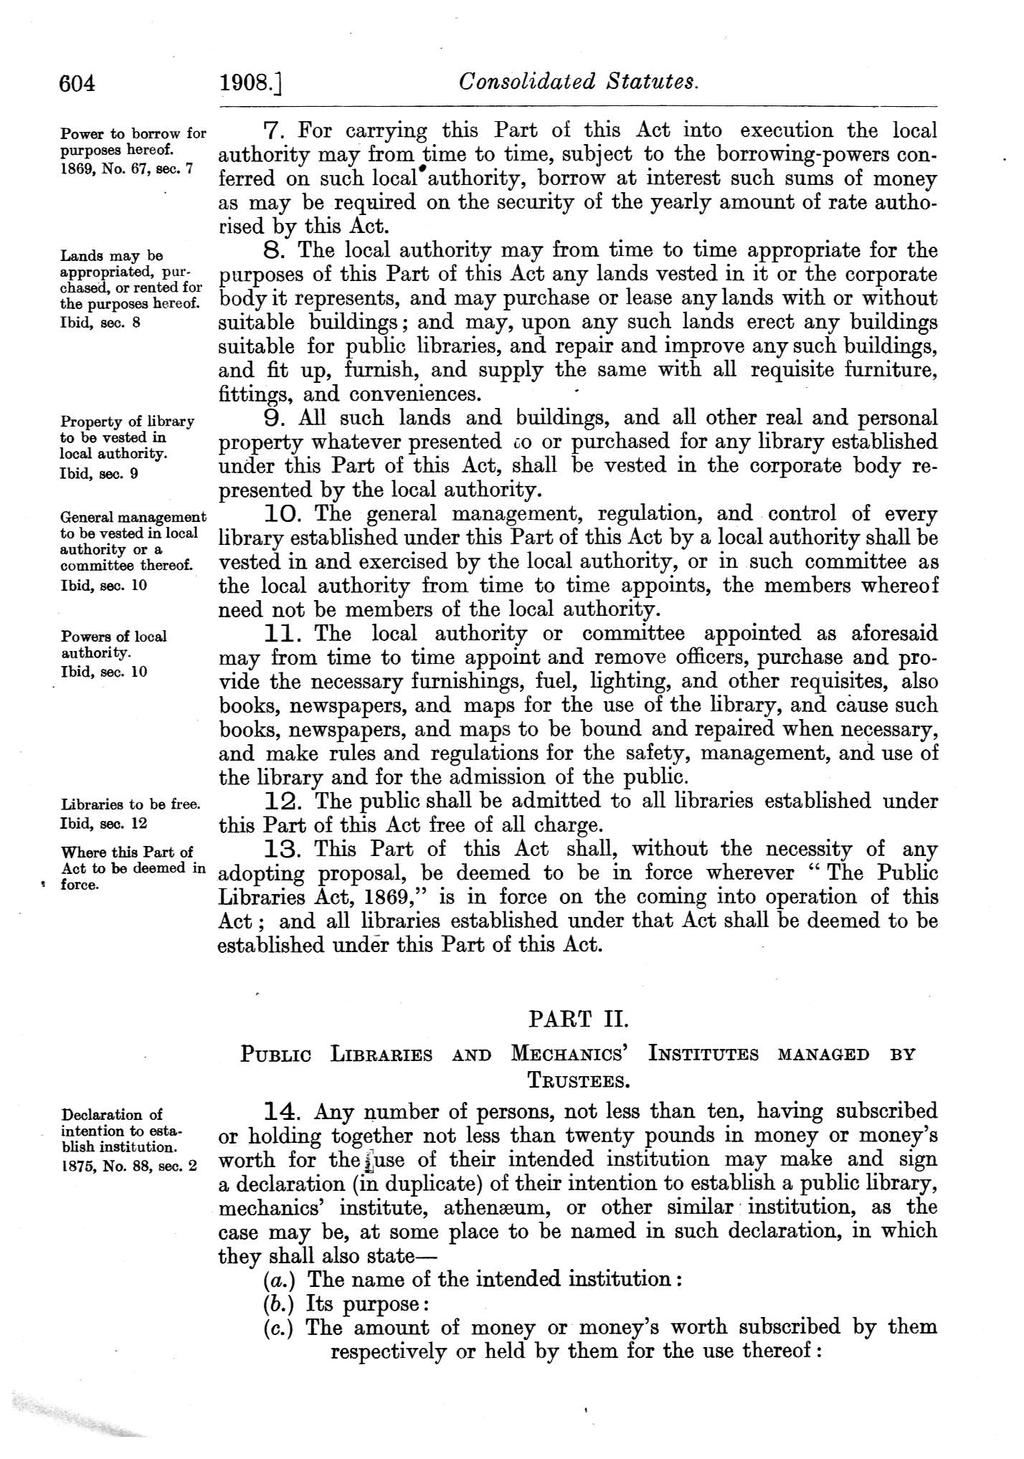 604 1908.] Consolidated Statutes. Power to borrow for purposes hereof. 1869, No. 67, sec. 7 Lands may be appropriated, purchased, or rented for the purposes hereof. Ibid, sec.